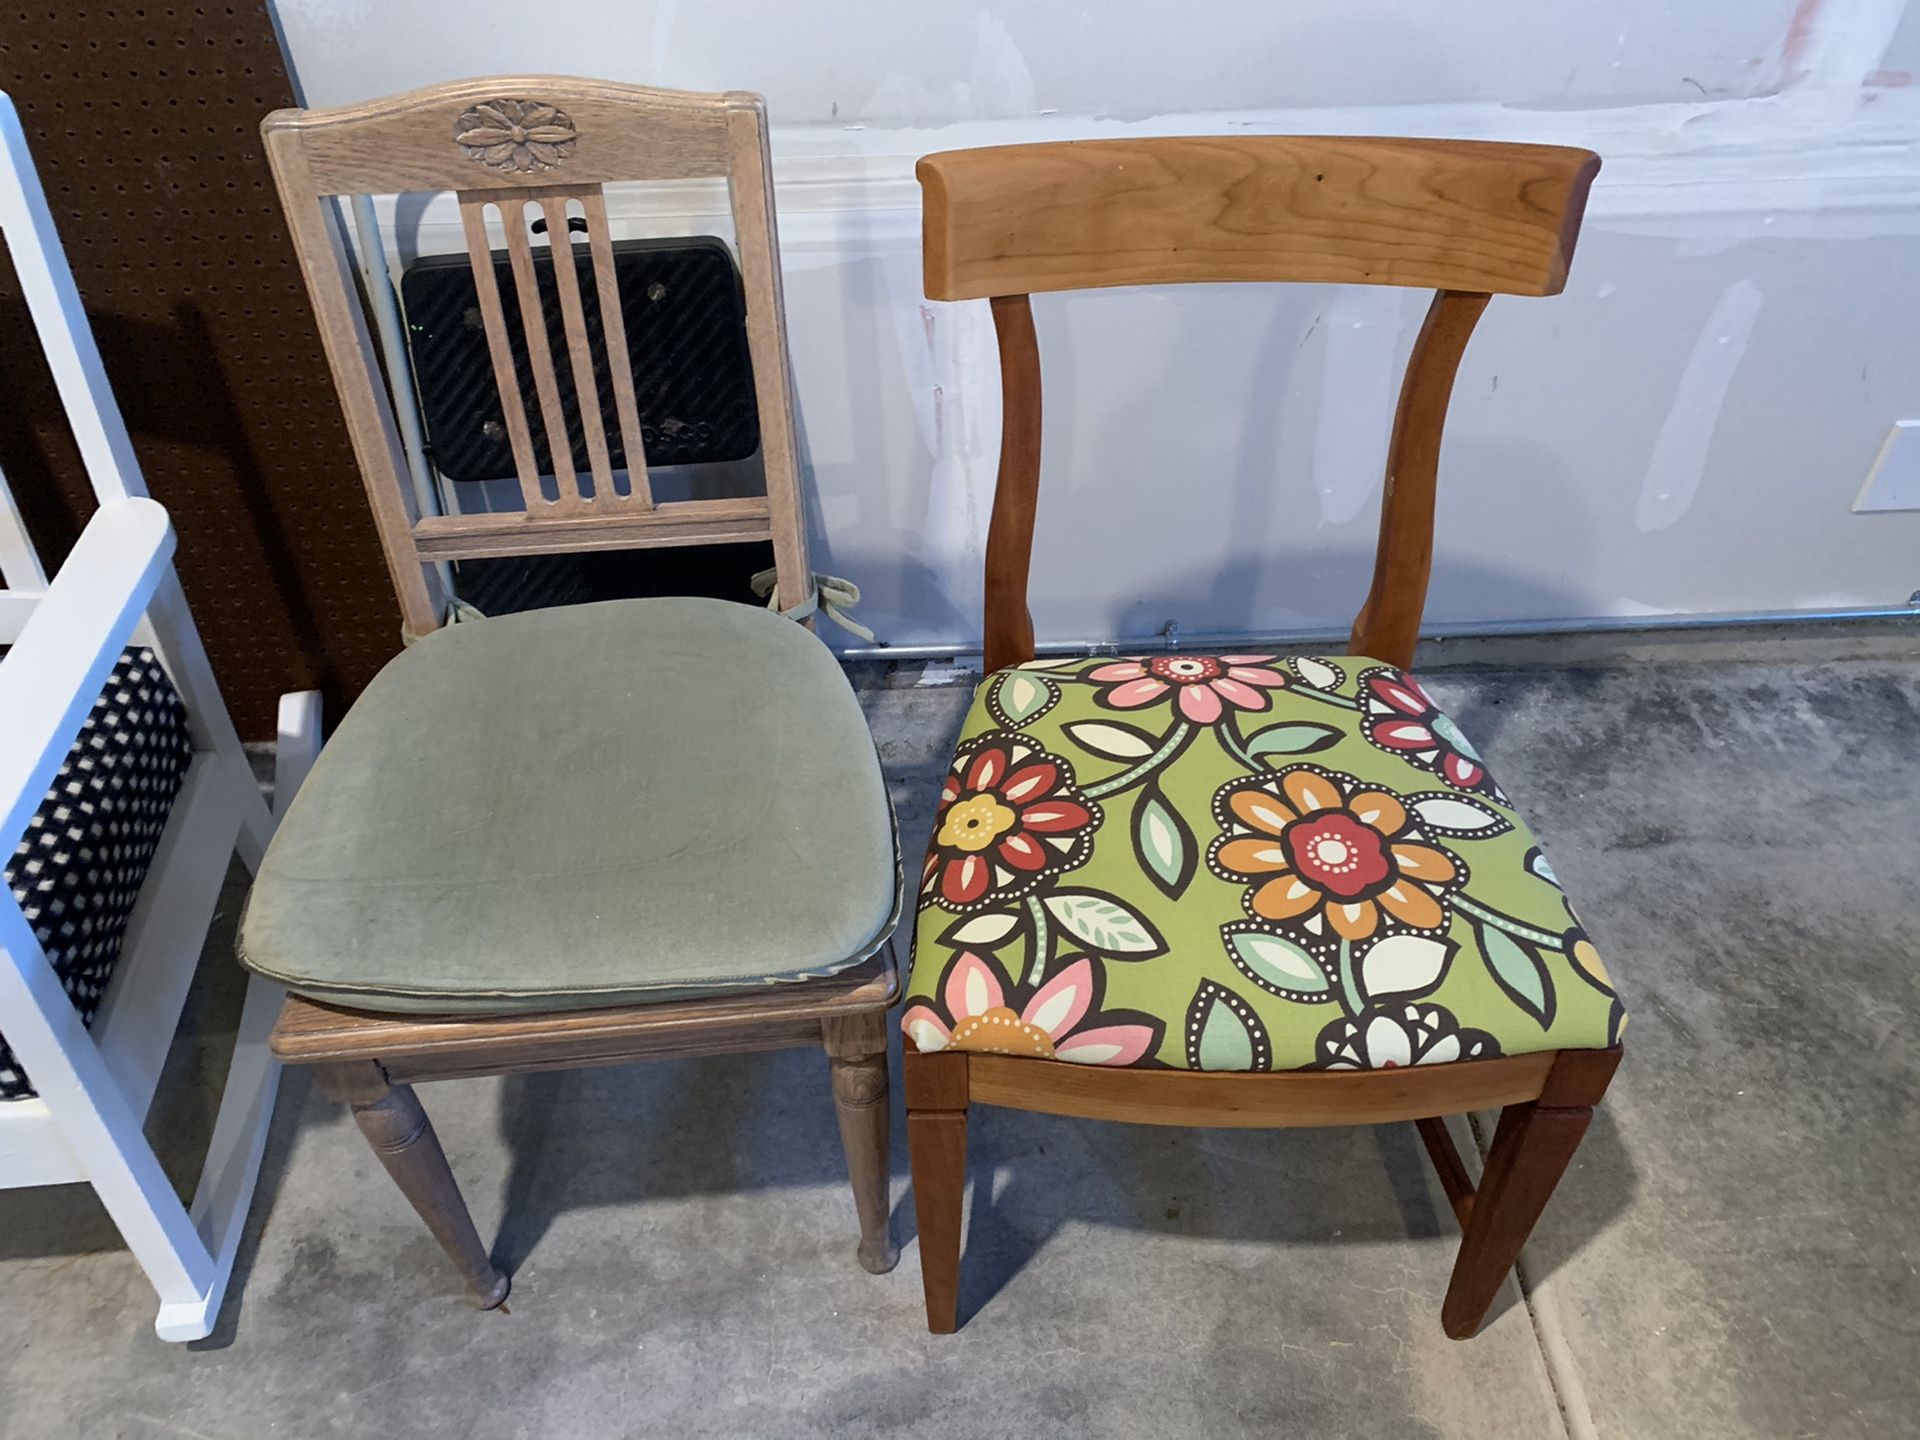 Two antique re-upholstered chairs